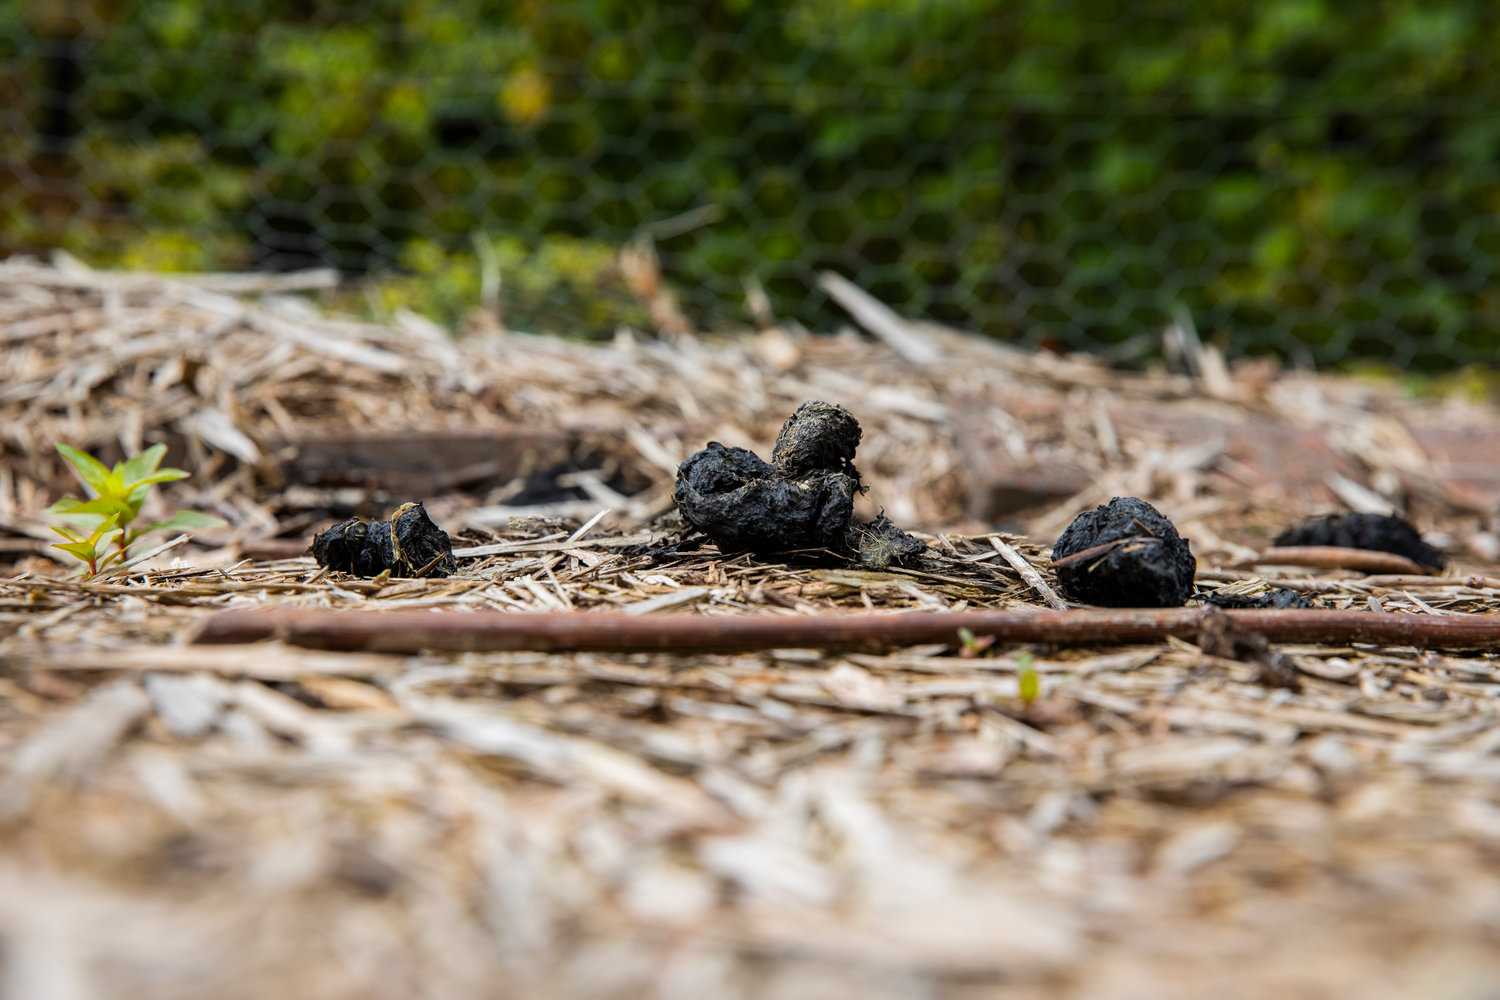 Bear feces sits next to a fenced garden in the Trentlage property on Davis Hill in Centralia.